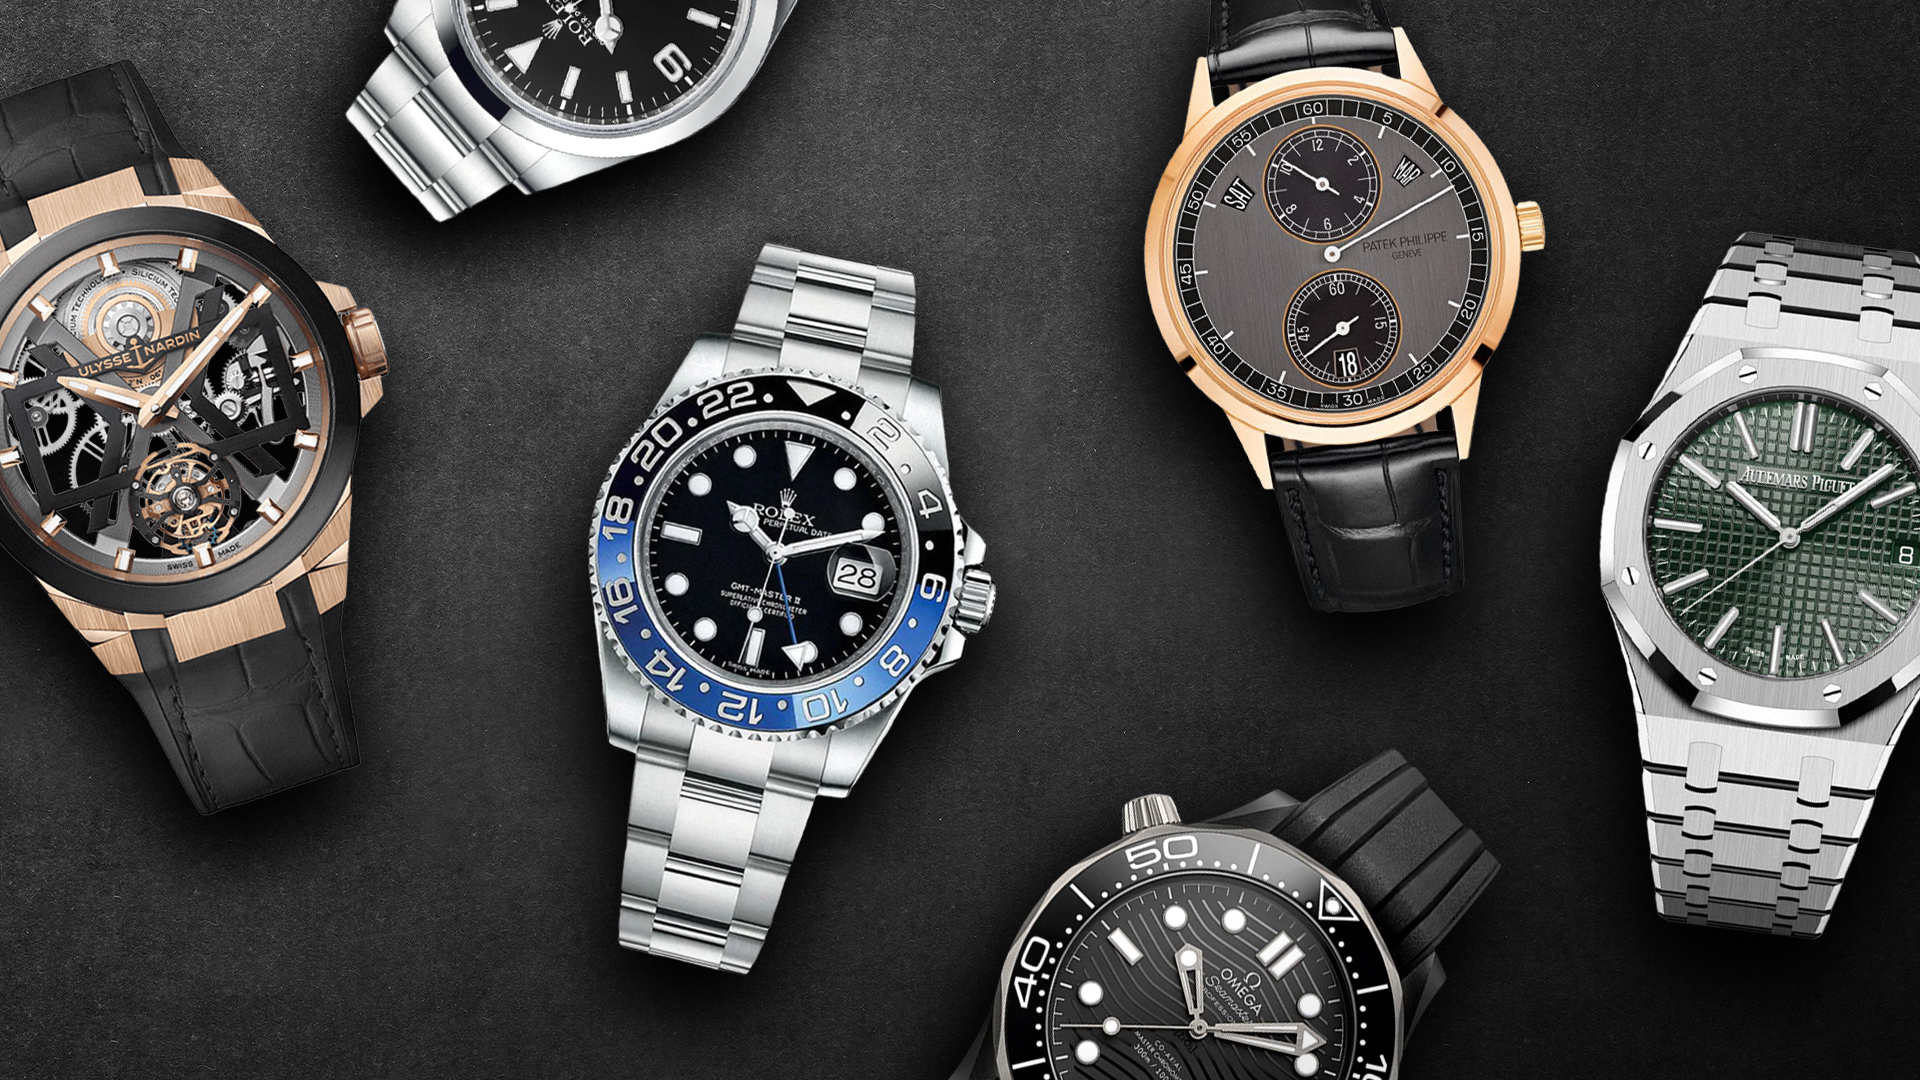 10 Good reasons to buy a Luxury Watch